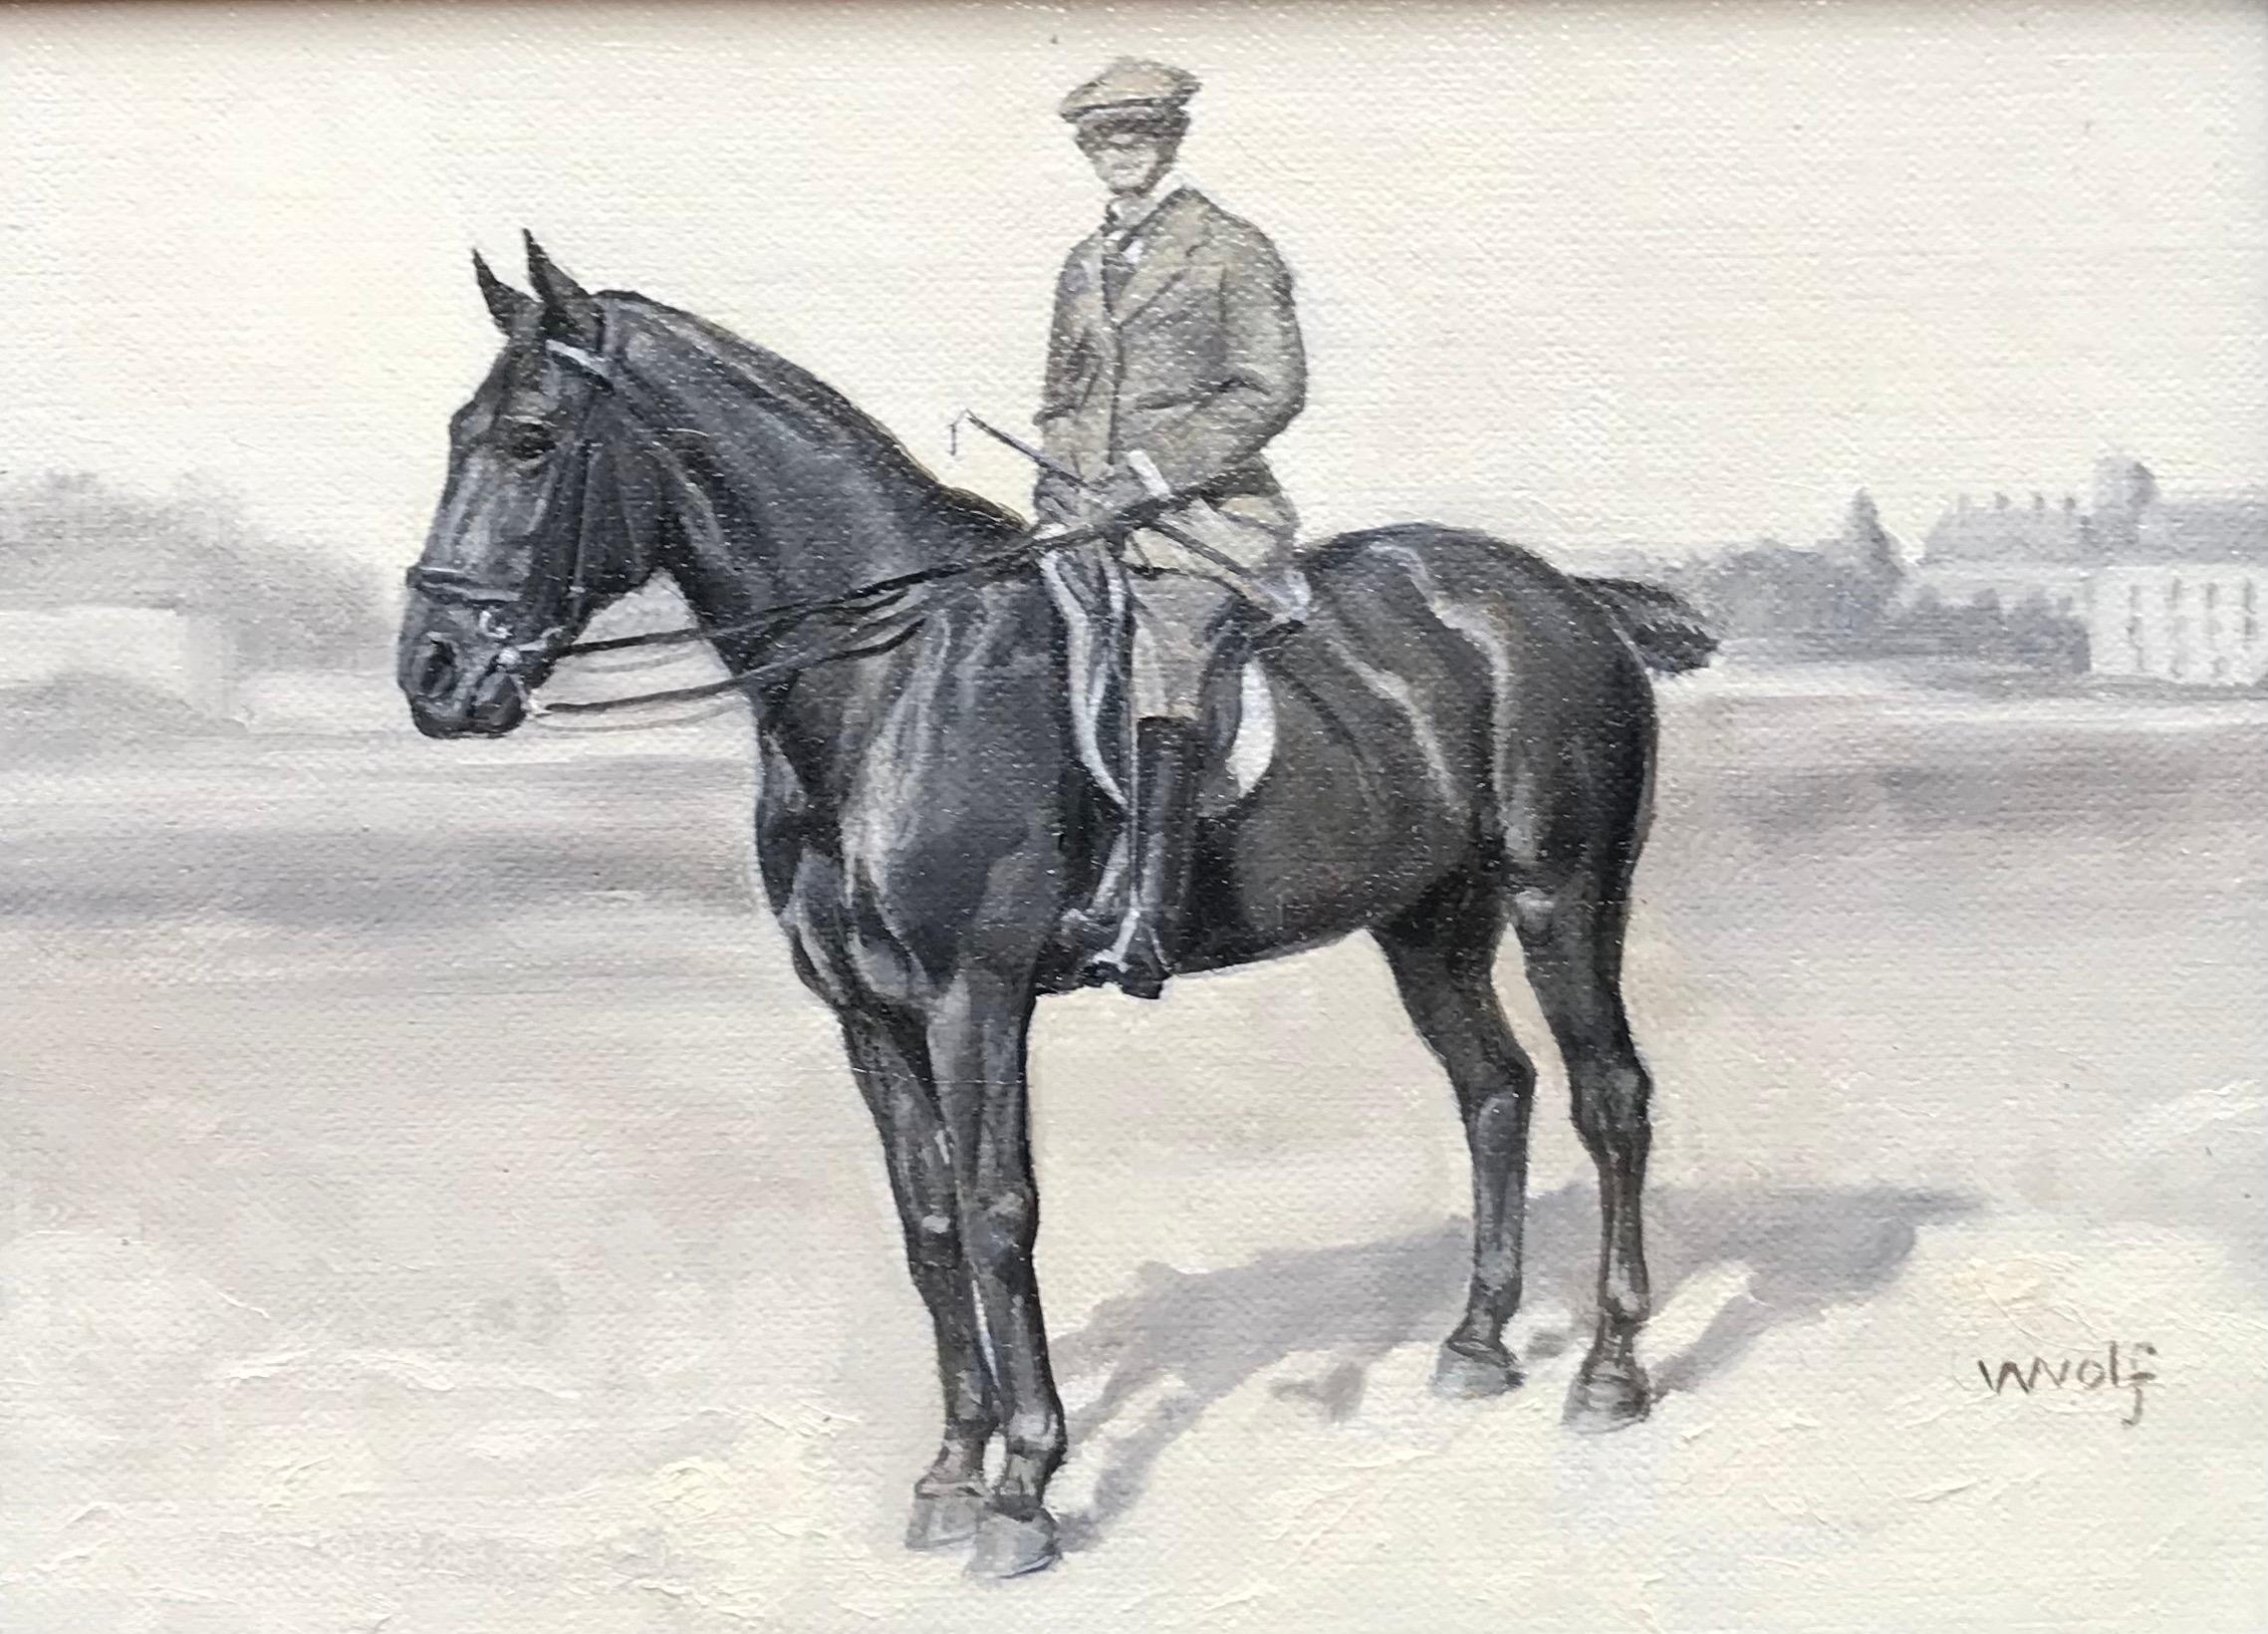 Valarie Wolf Animal Painting - Black and White Oil Horse Painting with Man with Cap Donned  Vintage Attire